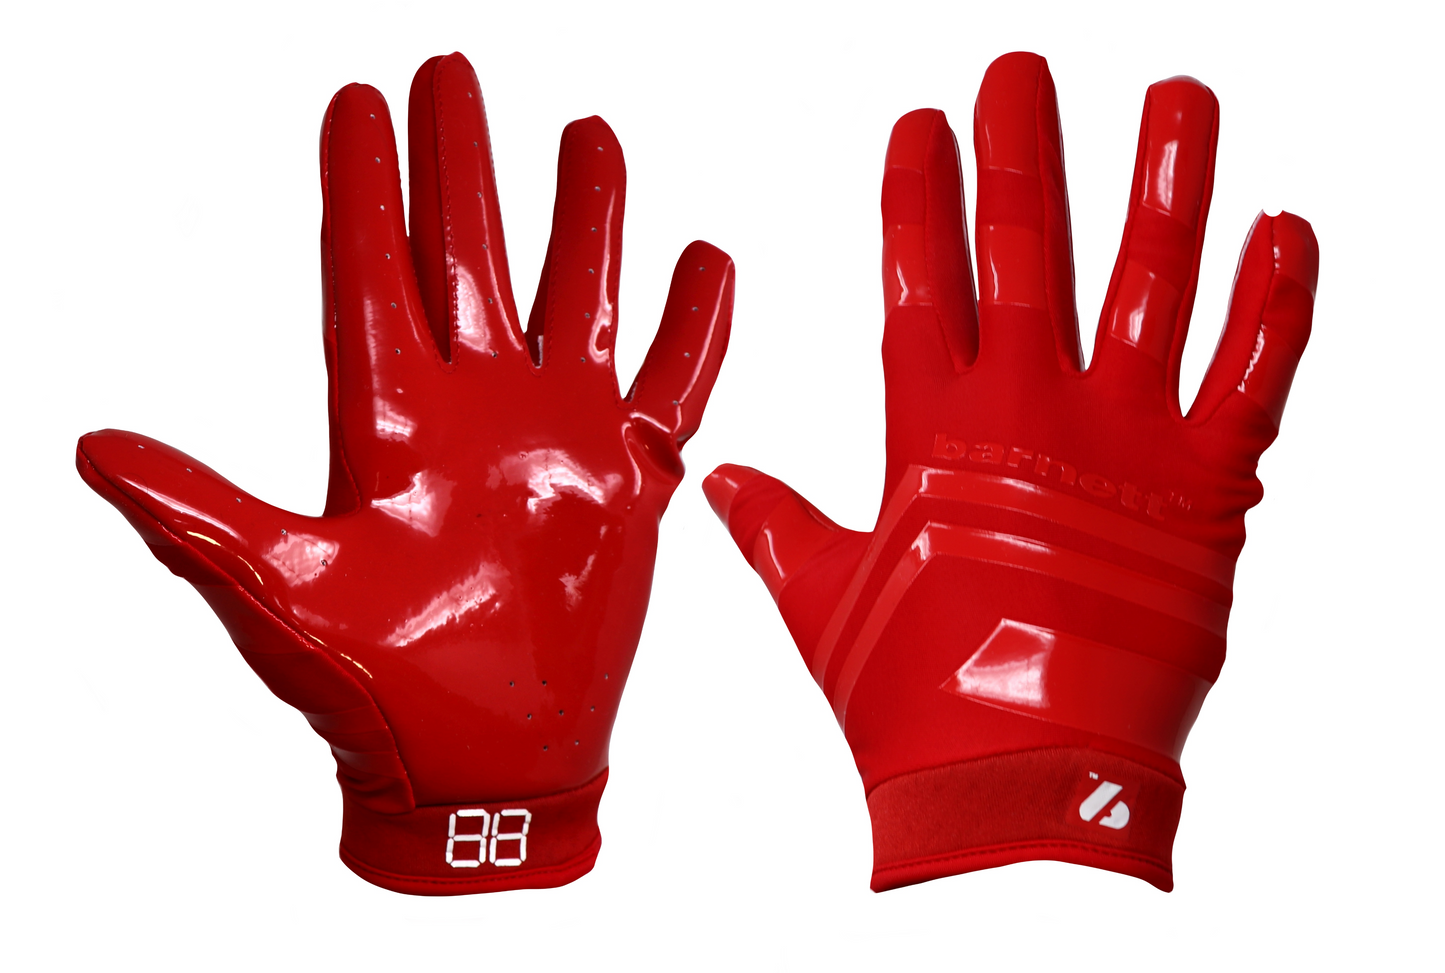 FRG-03 The best receiver football gloves, Red